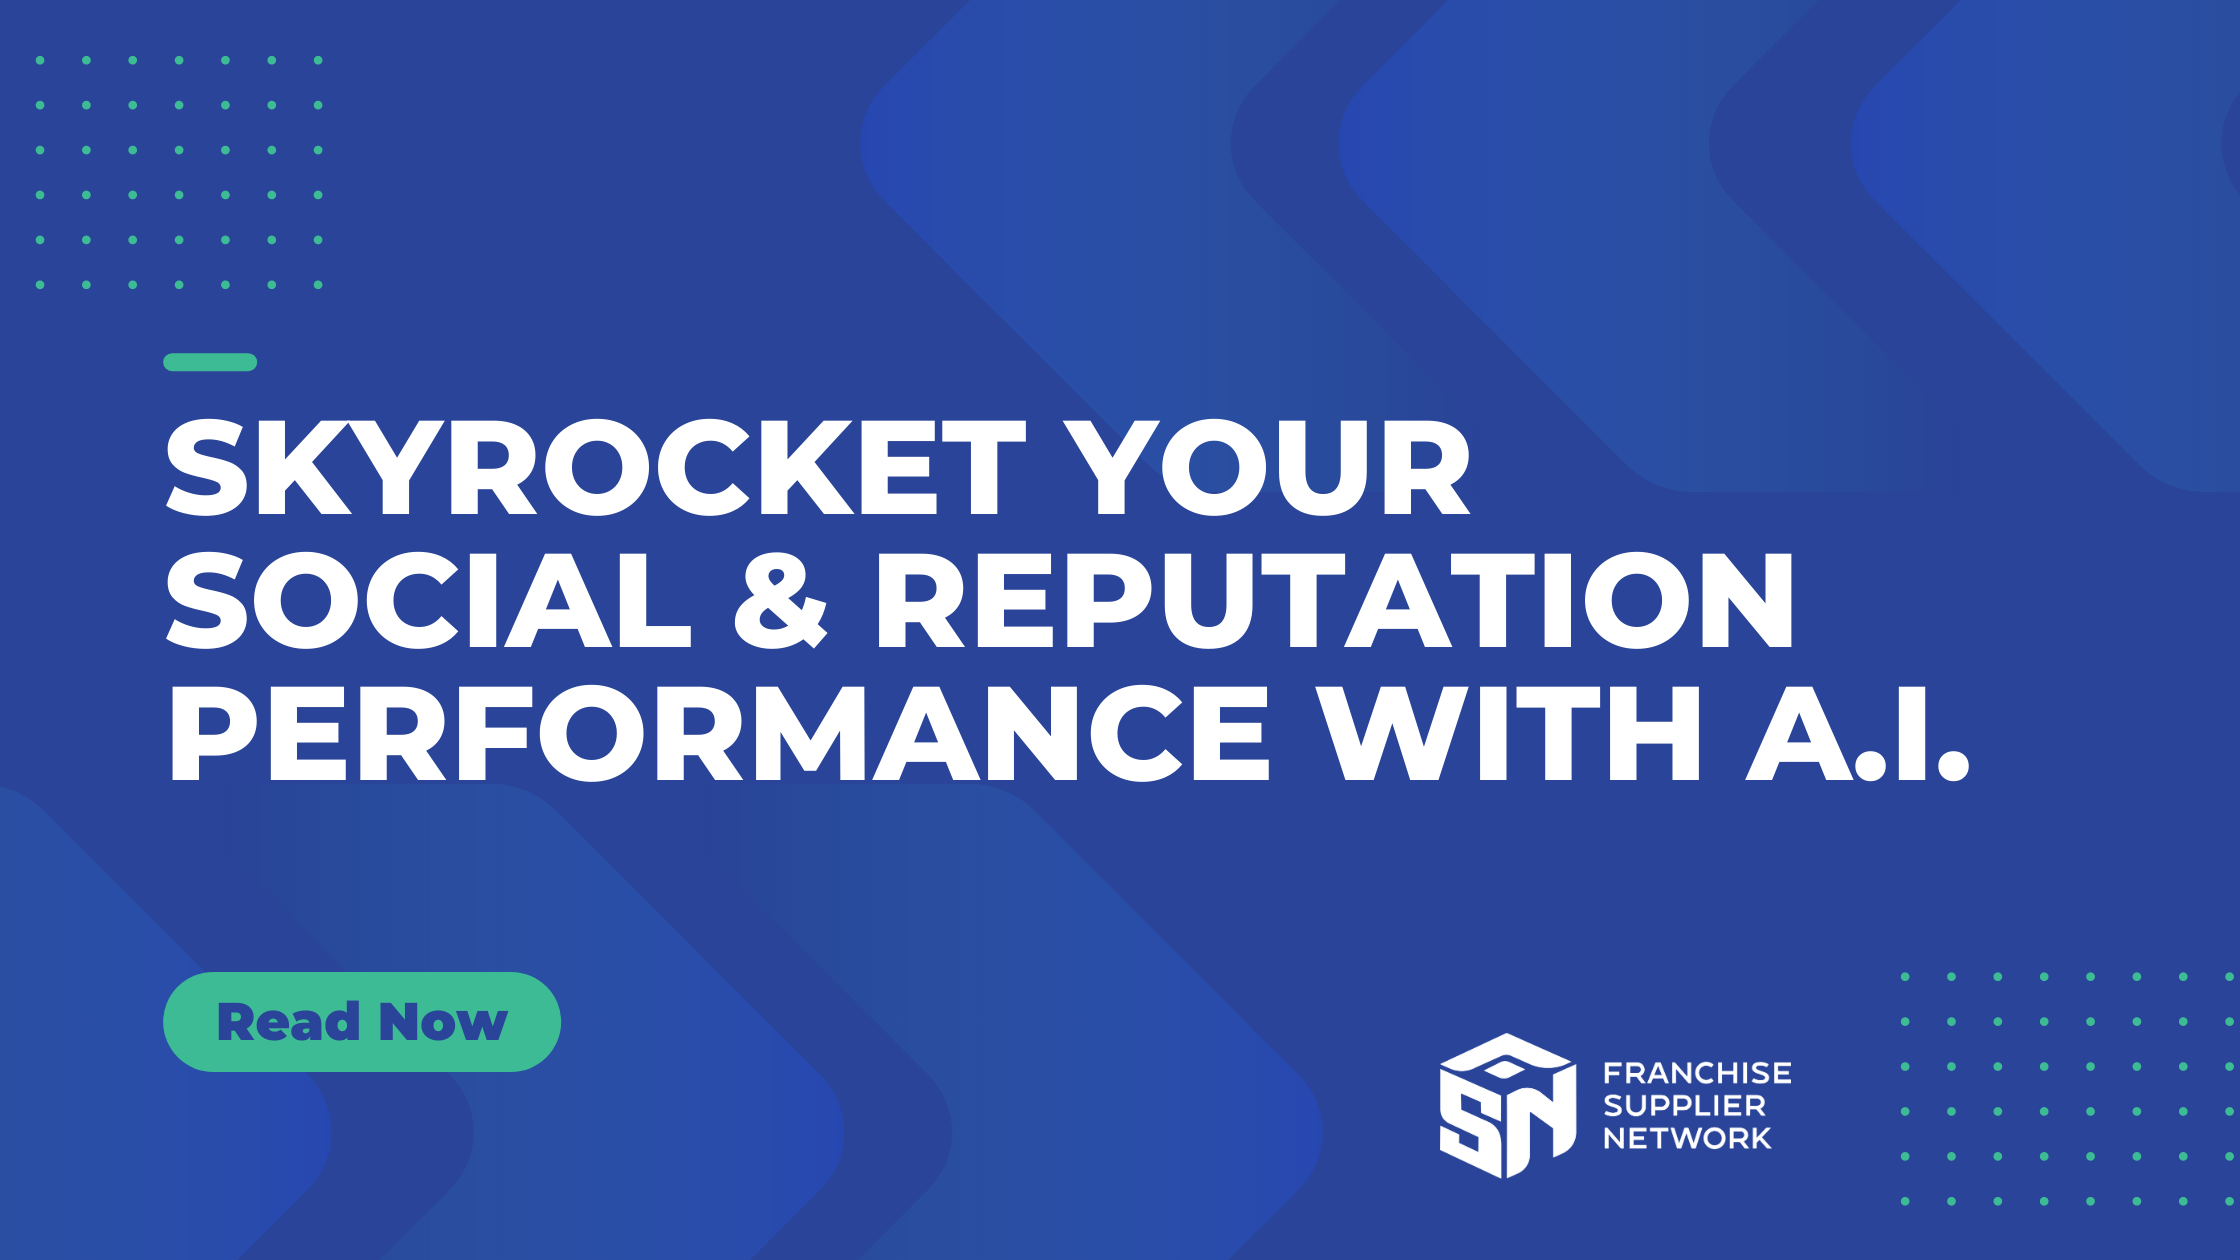 Skyrocket Your Franchisee Social Media & Reputation Performance with A.I.